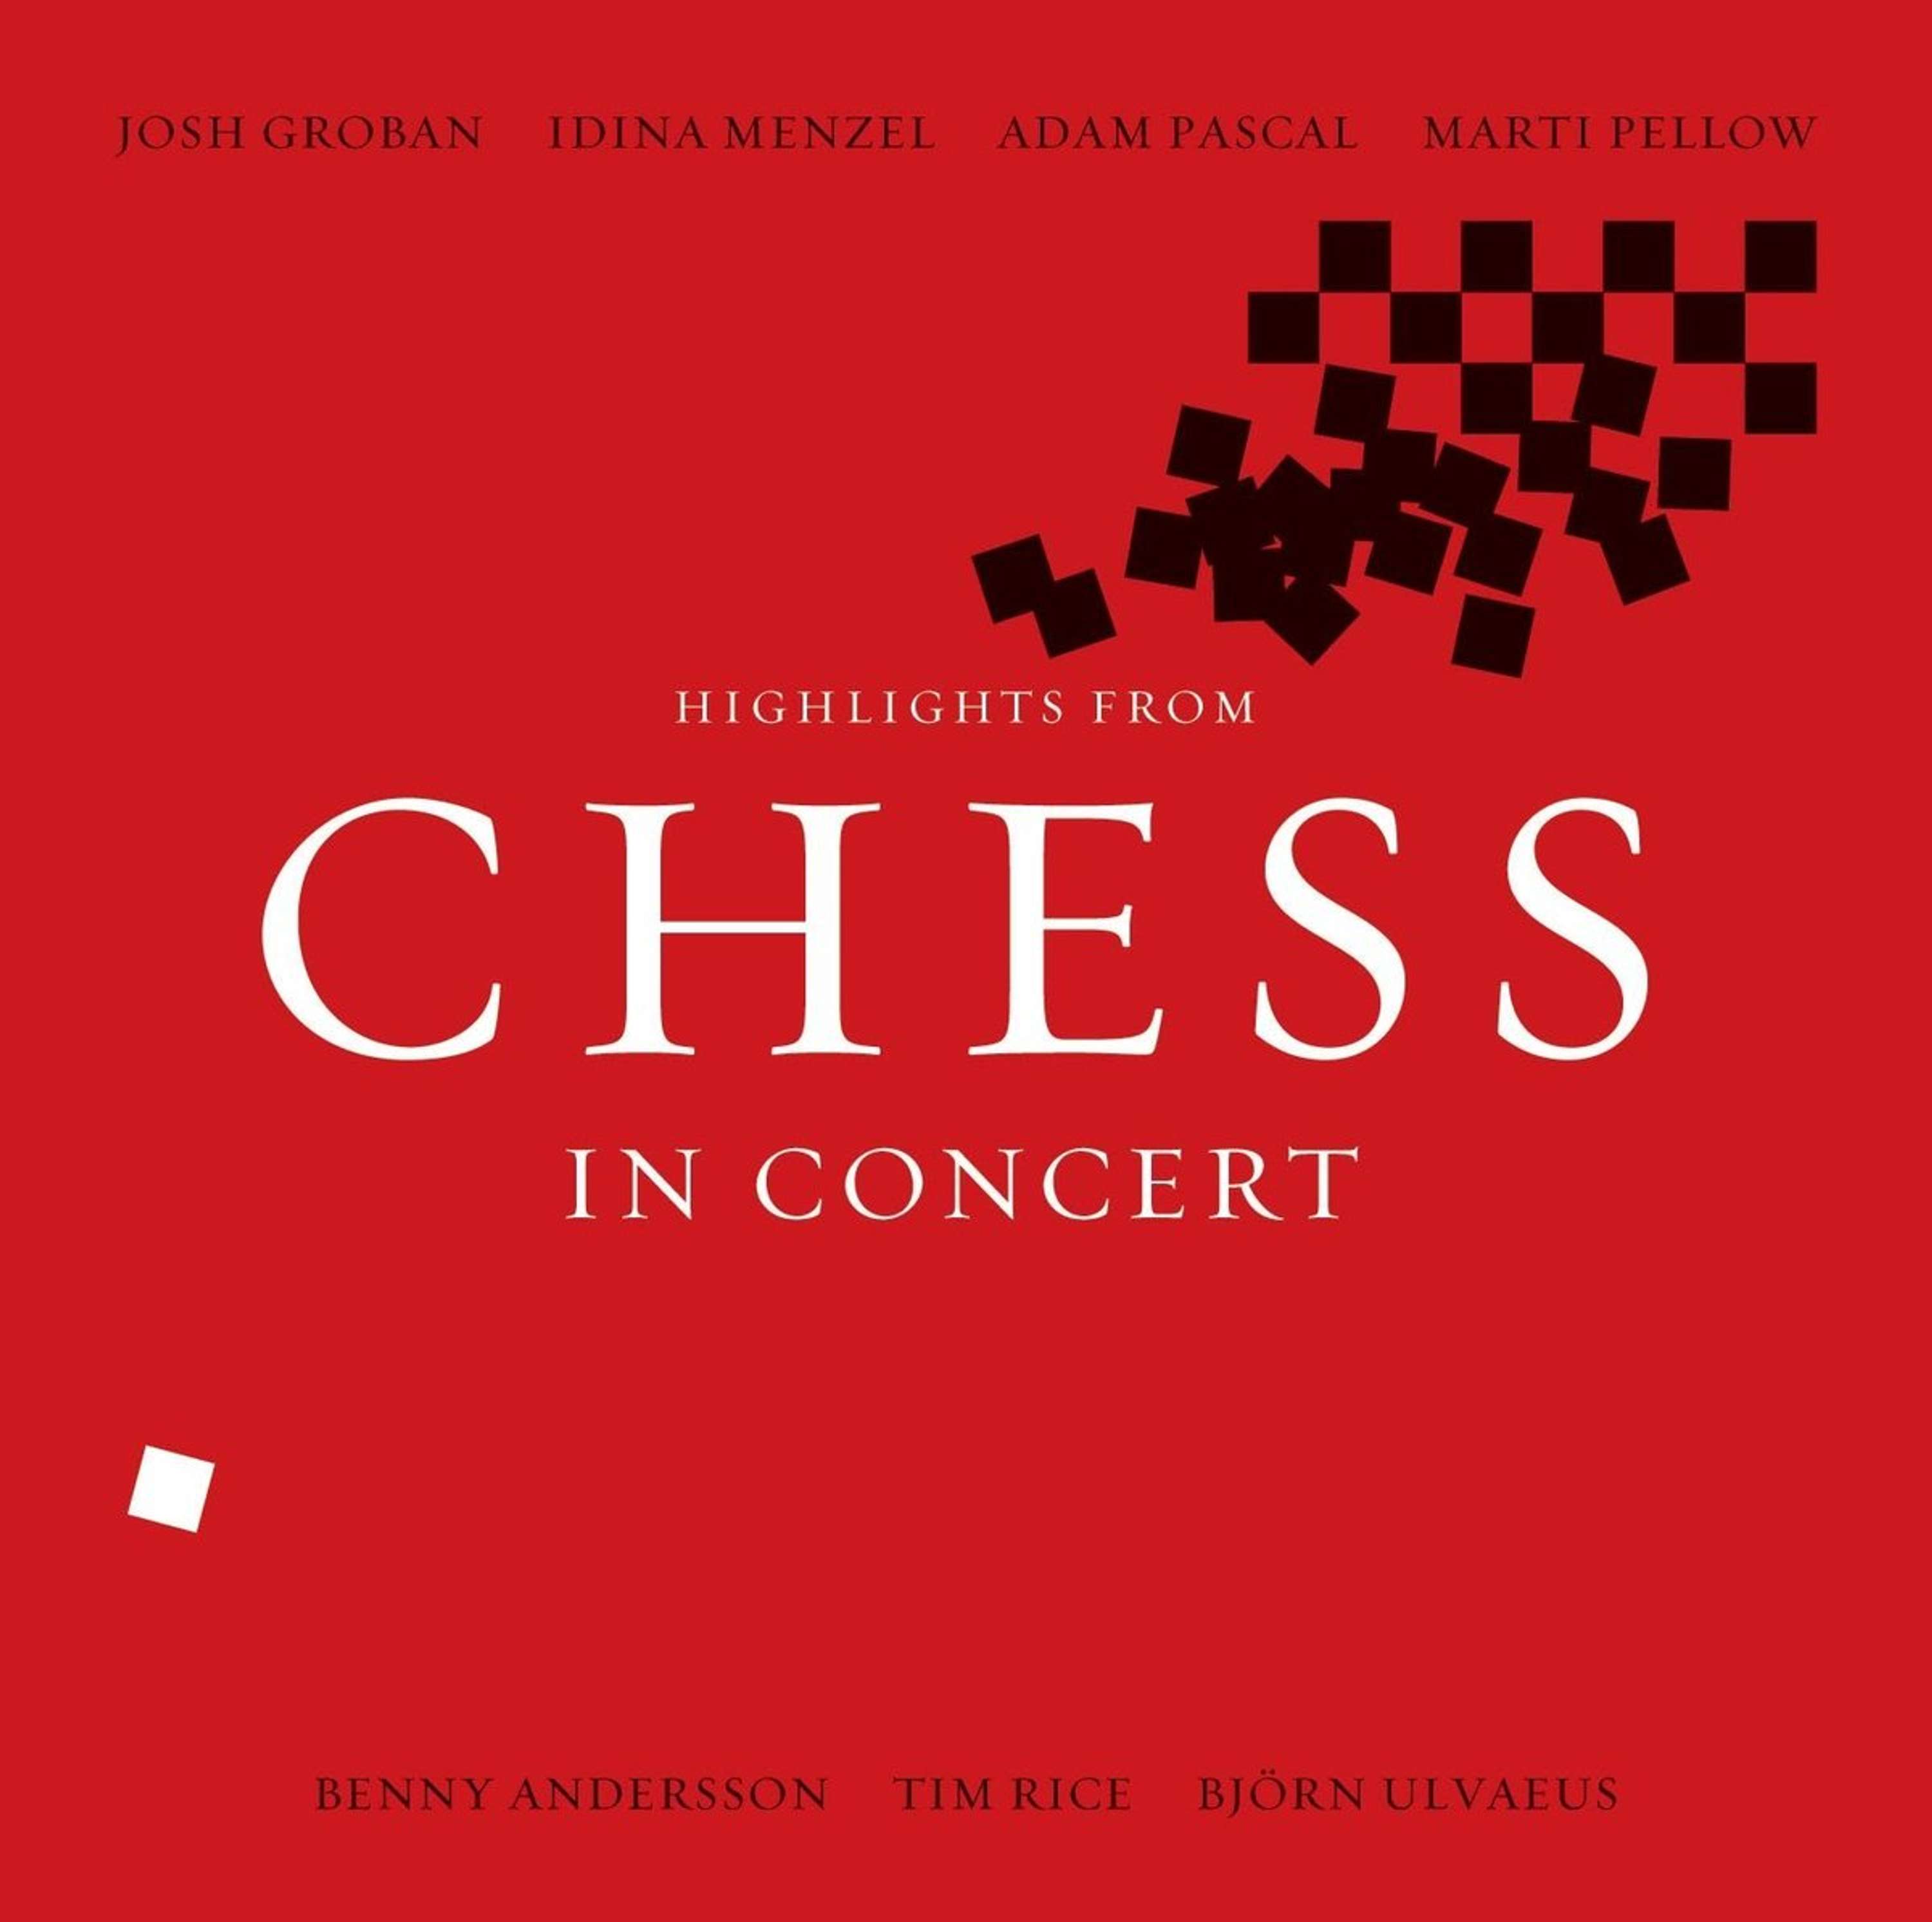 Great Performances: 'Chess' in Concert